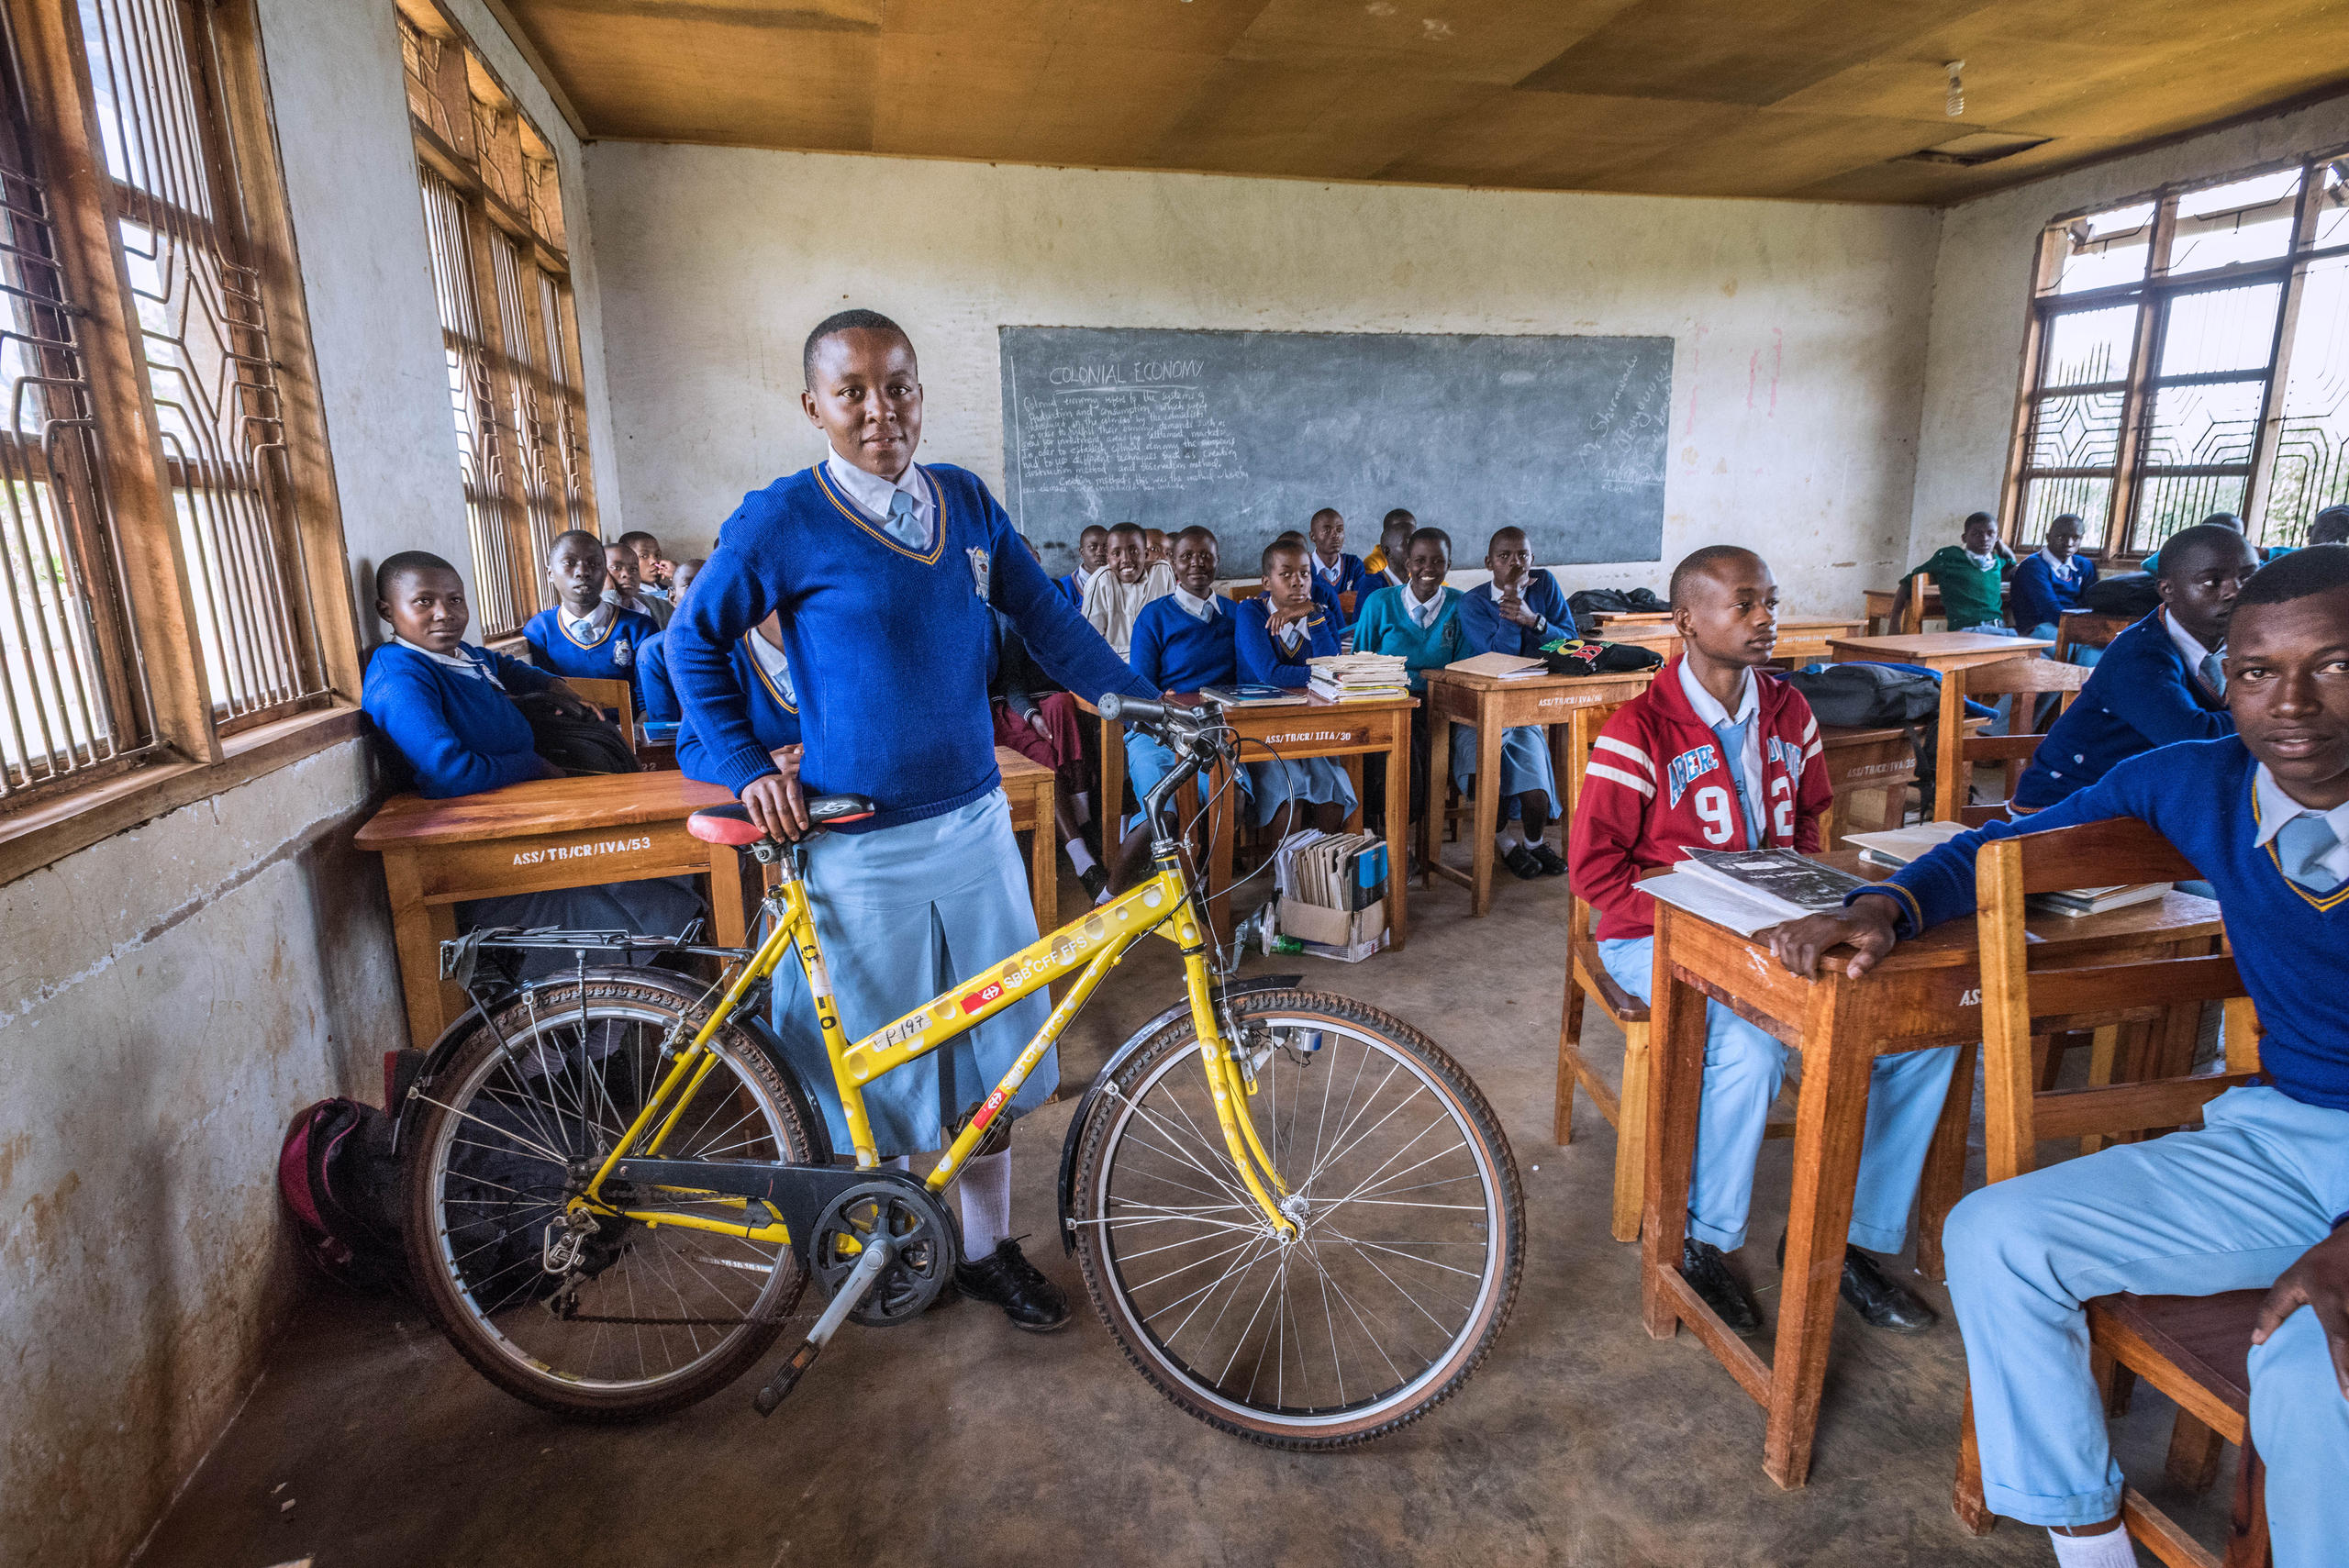 A pupils with a bicycle in a classroom